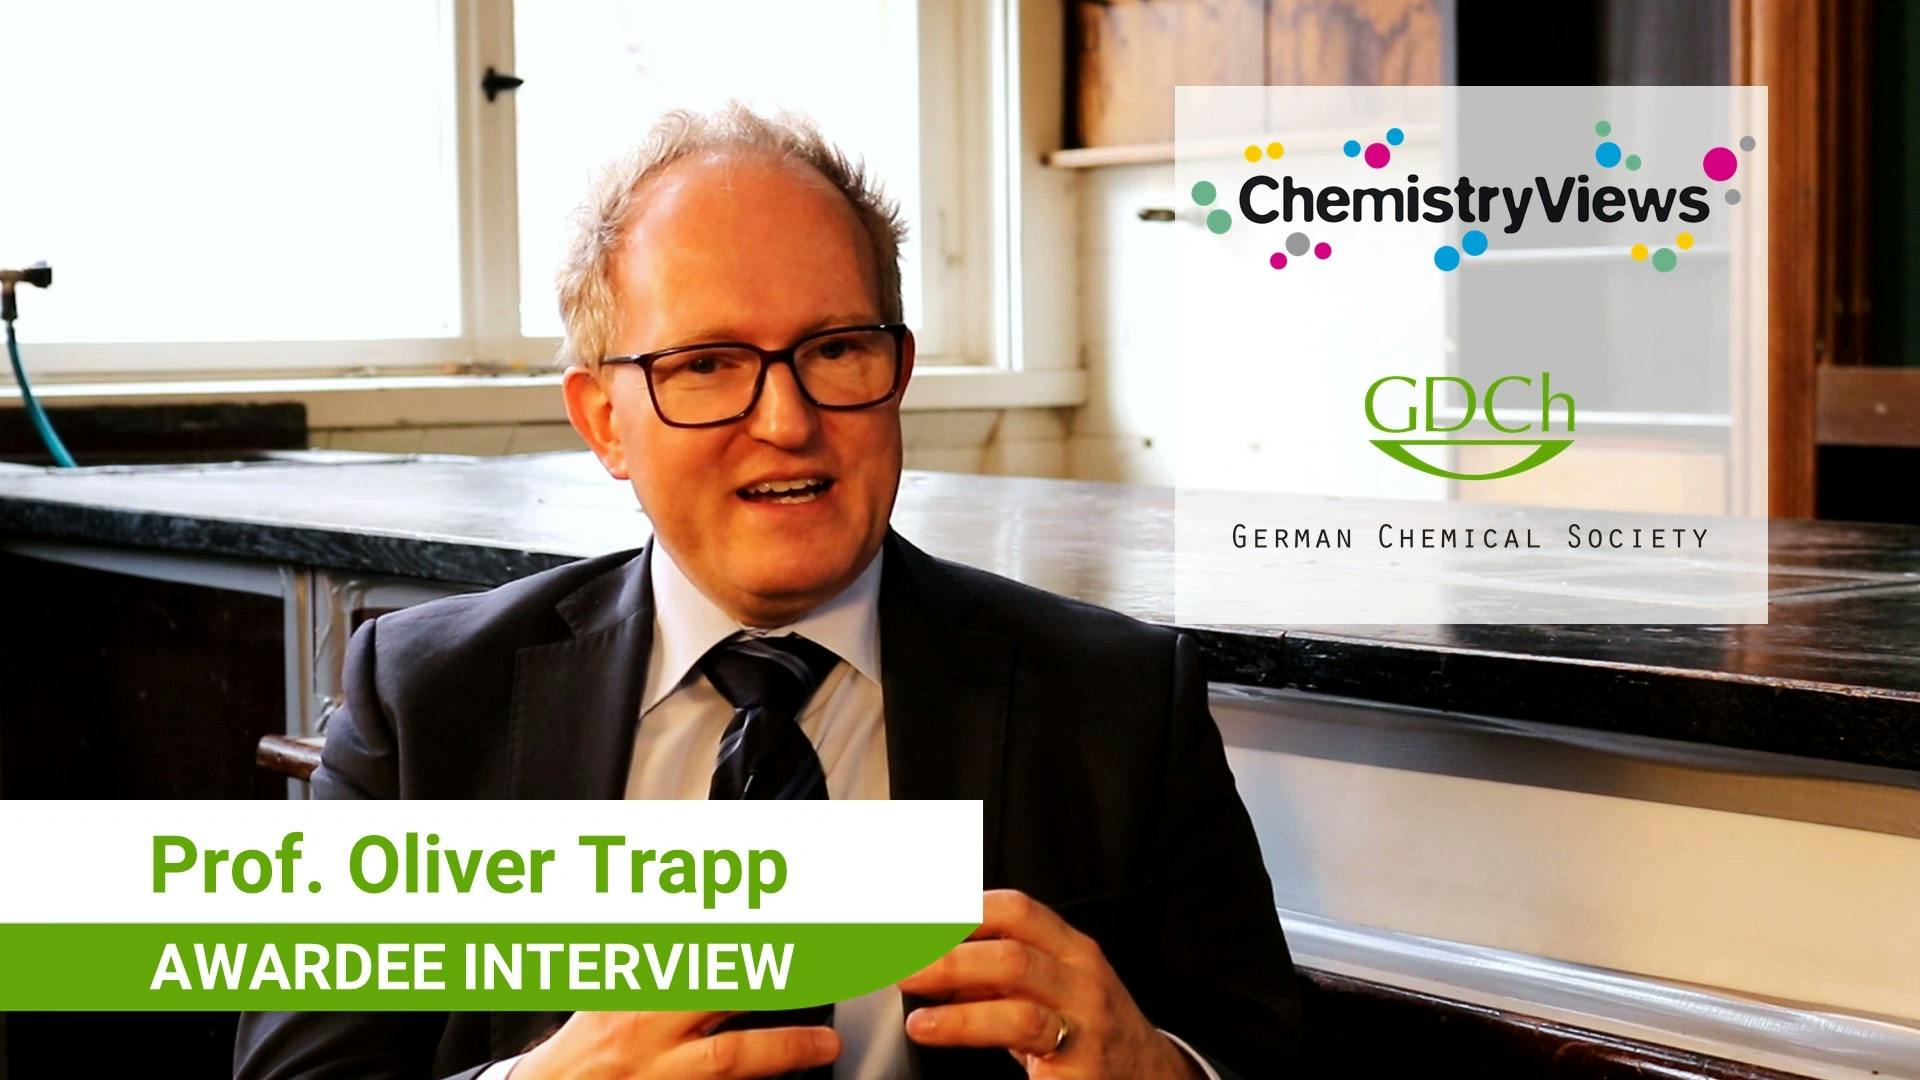 "Curiosity and passion, this is what drives." - Awardee interview with Oliver Trapp